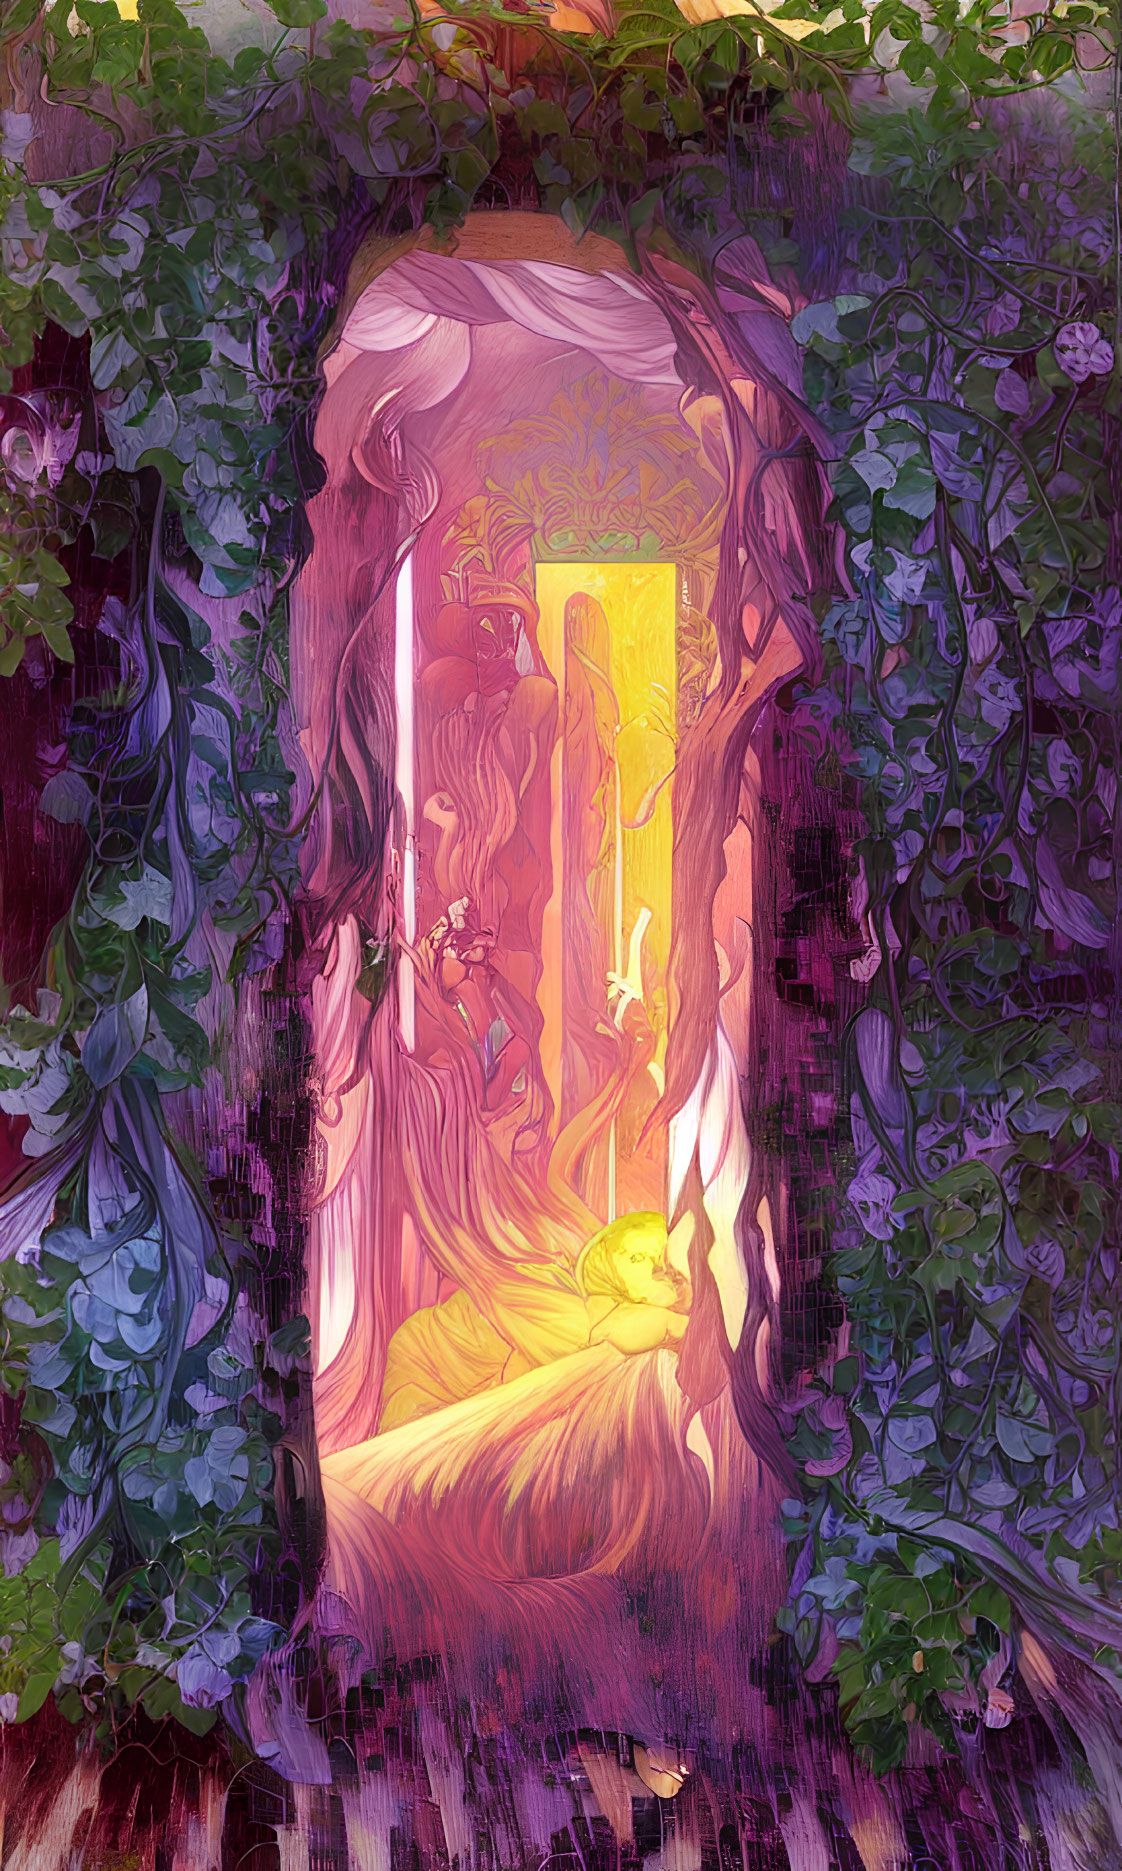 Mystical archway illustration with golden interior and reclining figure